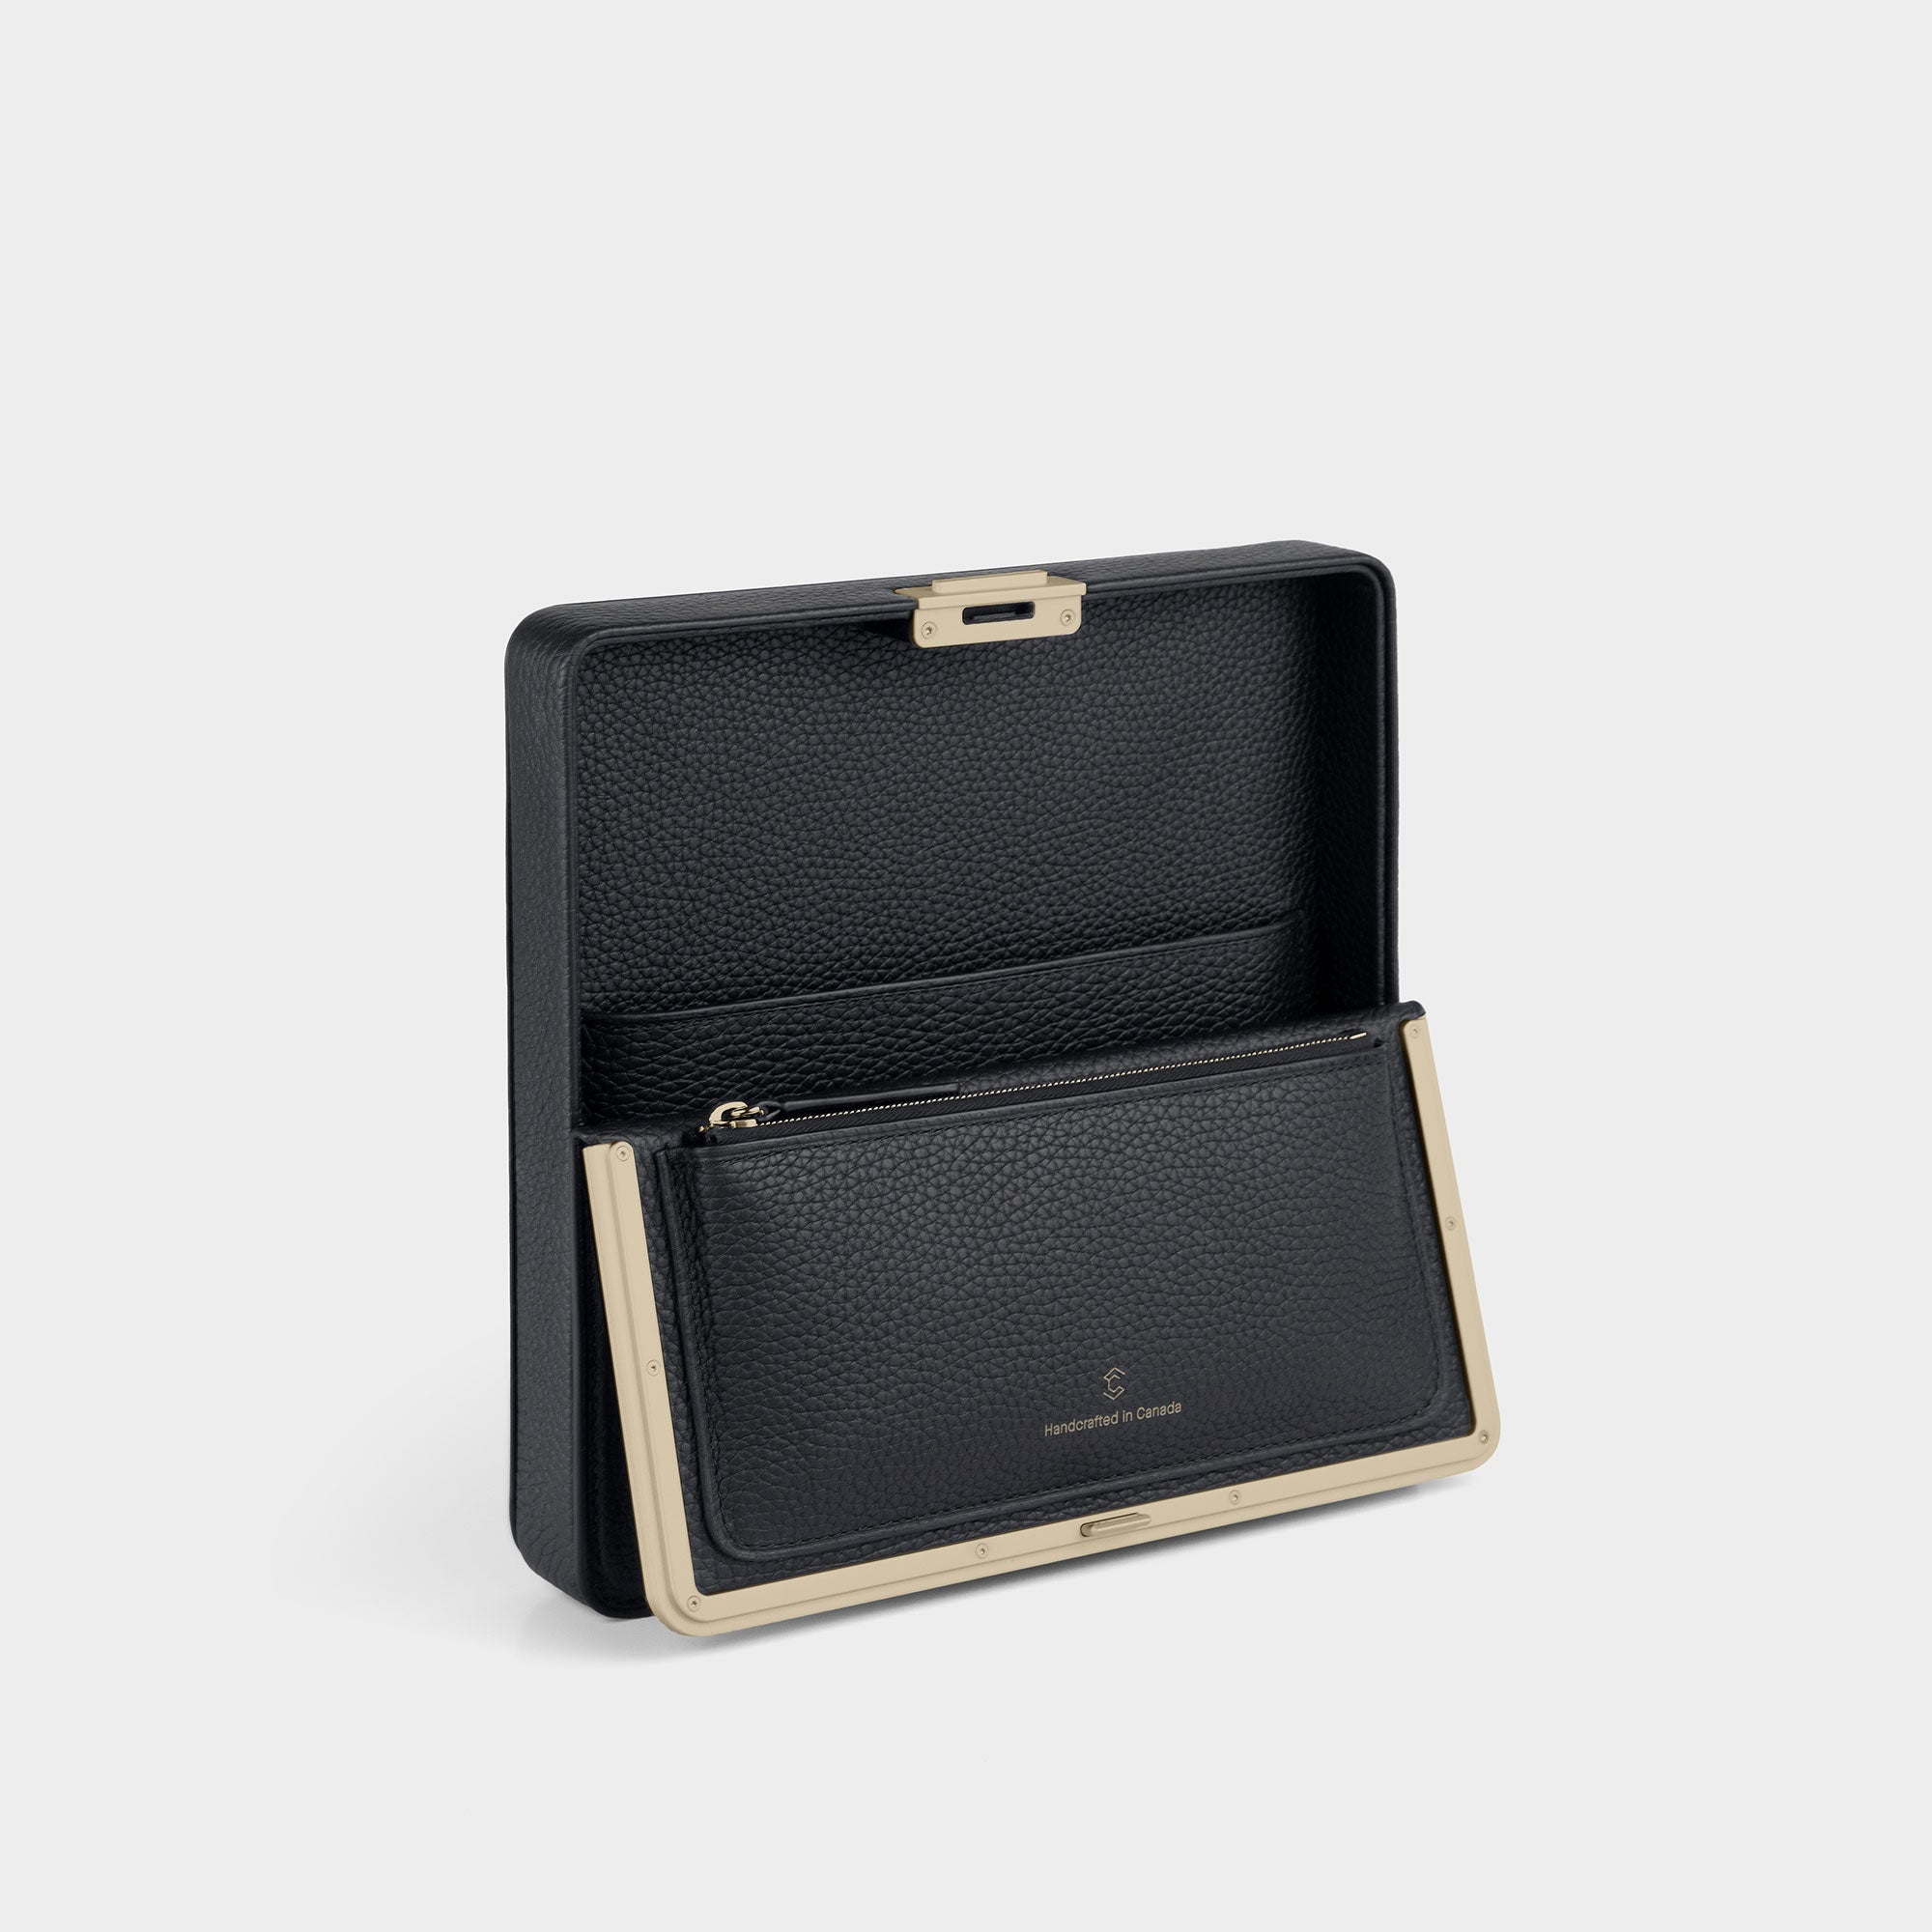 Product photo of open Fraser luxury travel wallet in gold and black leather